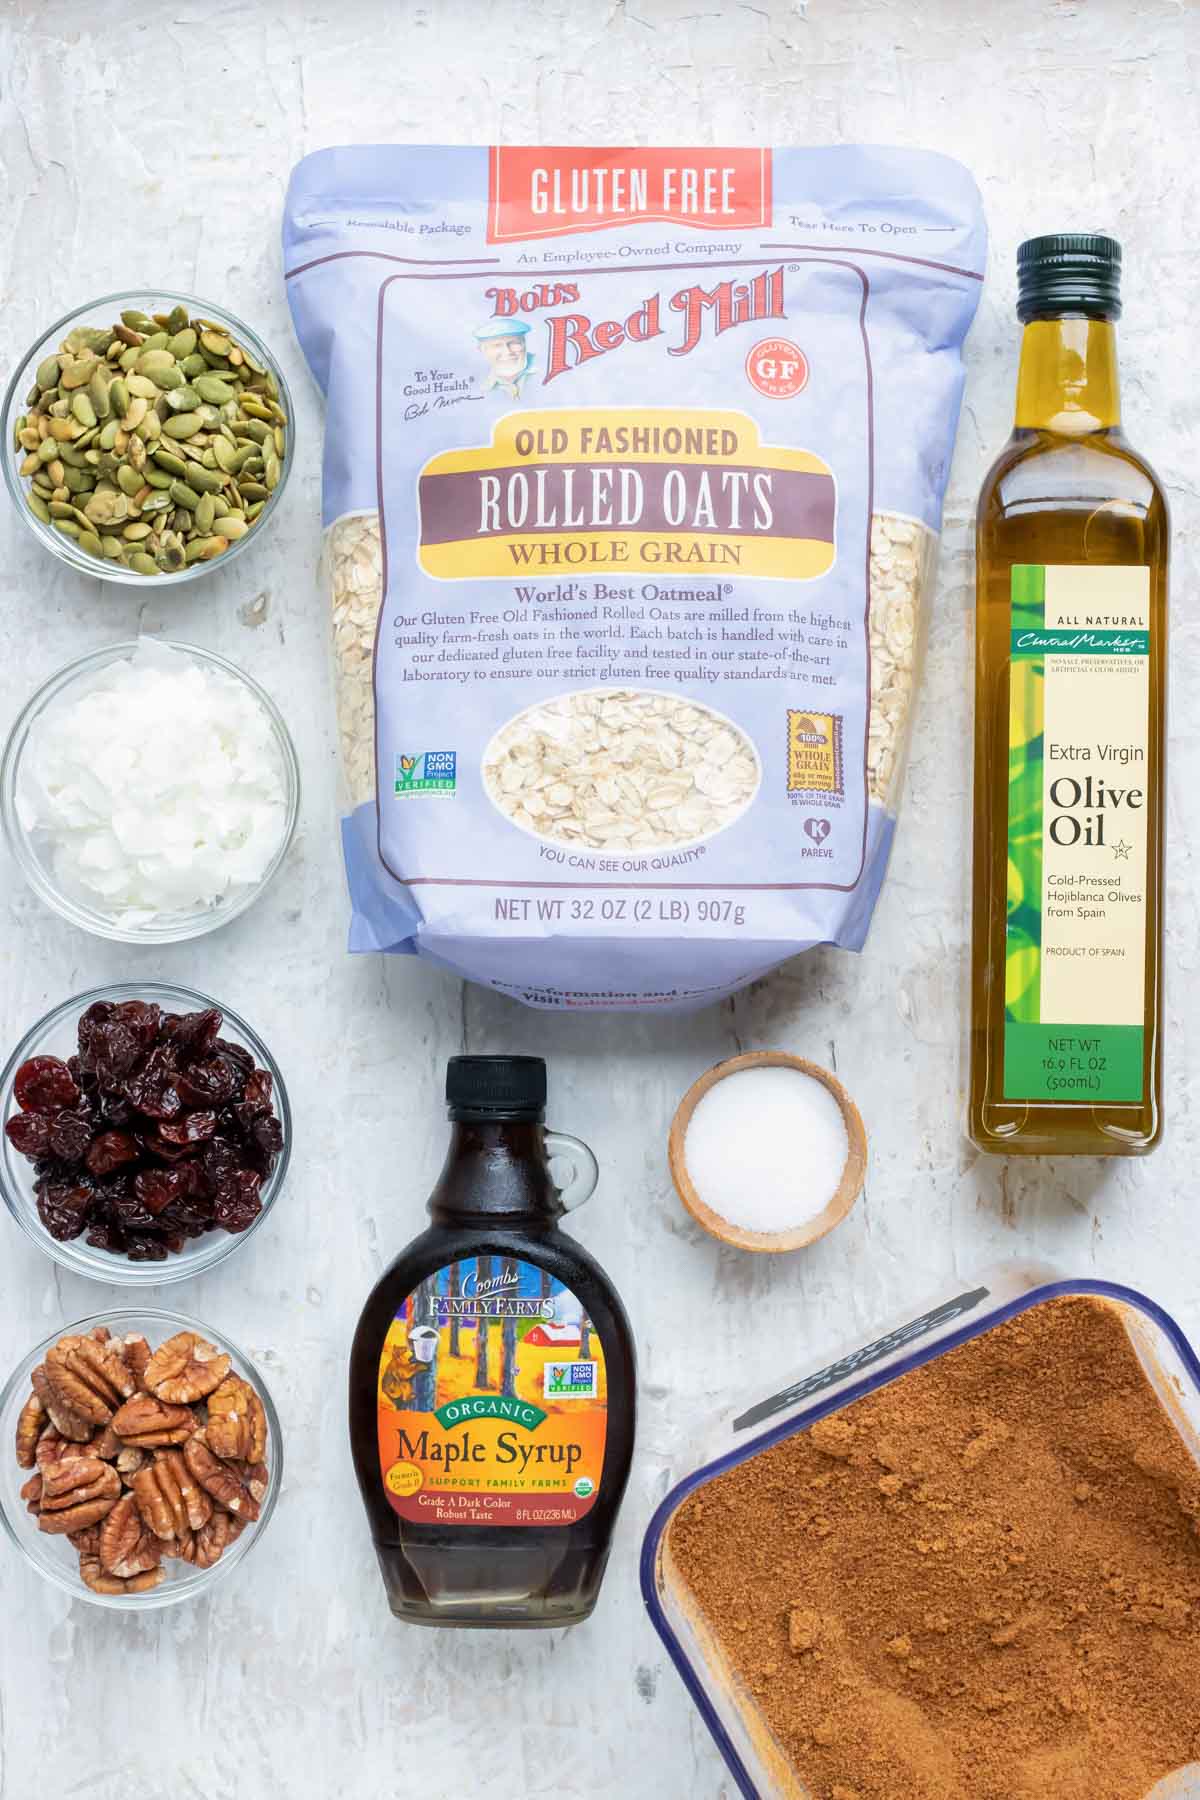 Ingredients for a gluten-free and vegan homemade granola recipe.